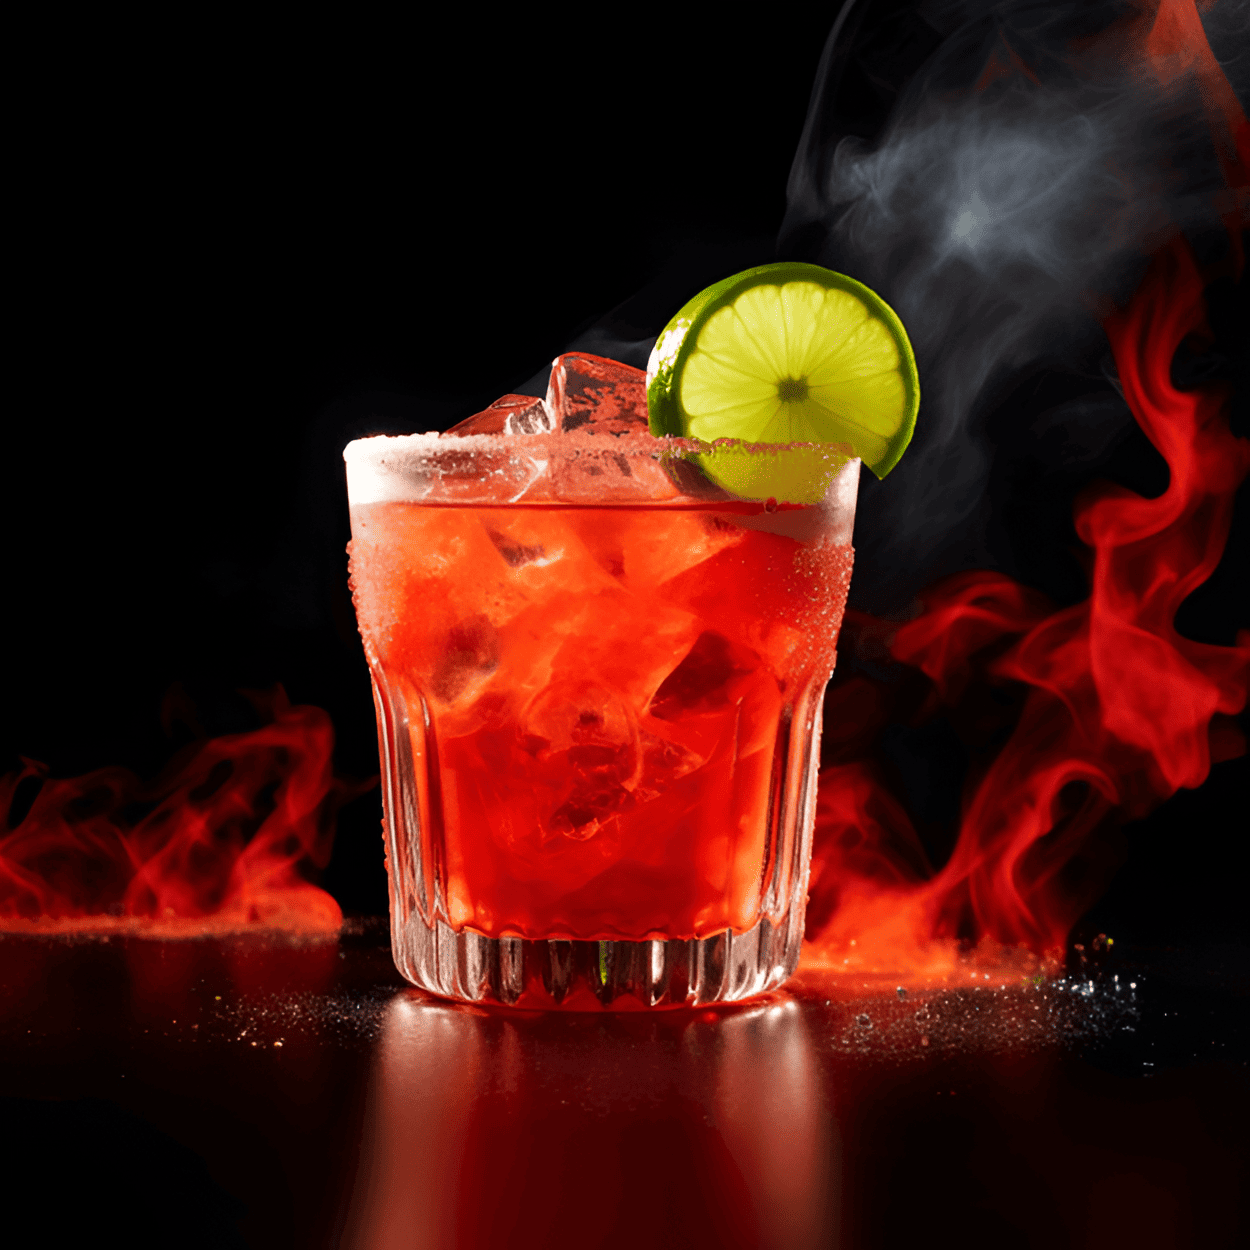 Snake Venom Cocktail Recipe - The Snake Venom cocktail is a strong, fiery, and robust drink. It has a potent kick that hits you right from the first sip. The taste is a complex blend of sweet, sour, and spicy notes, with a strong alcoholic punch that lingers on the palate.